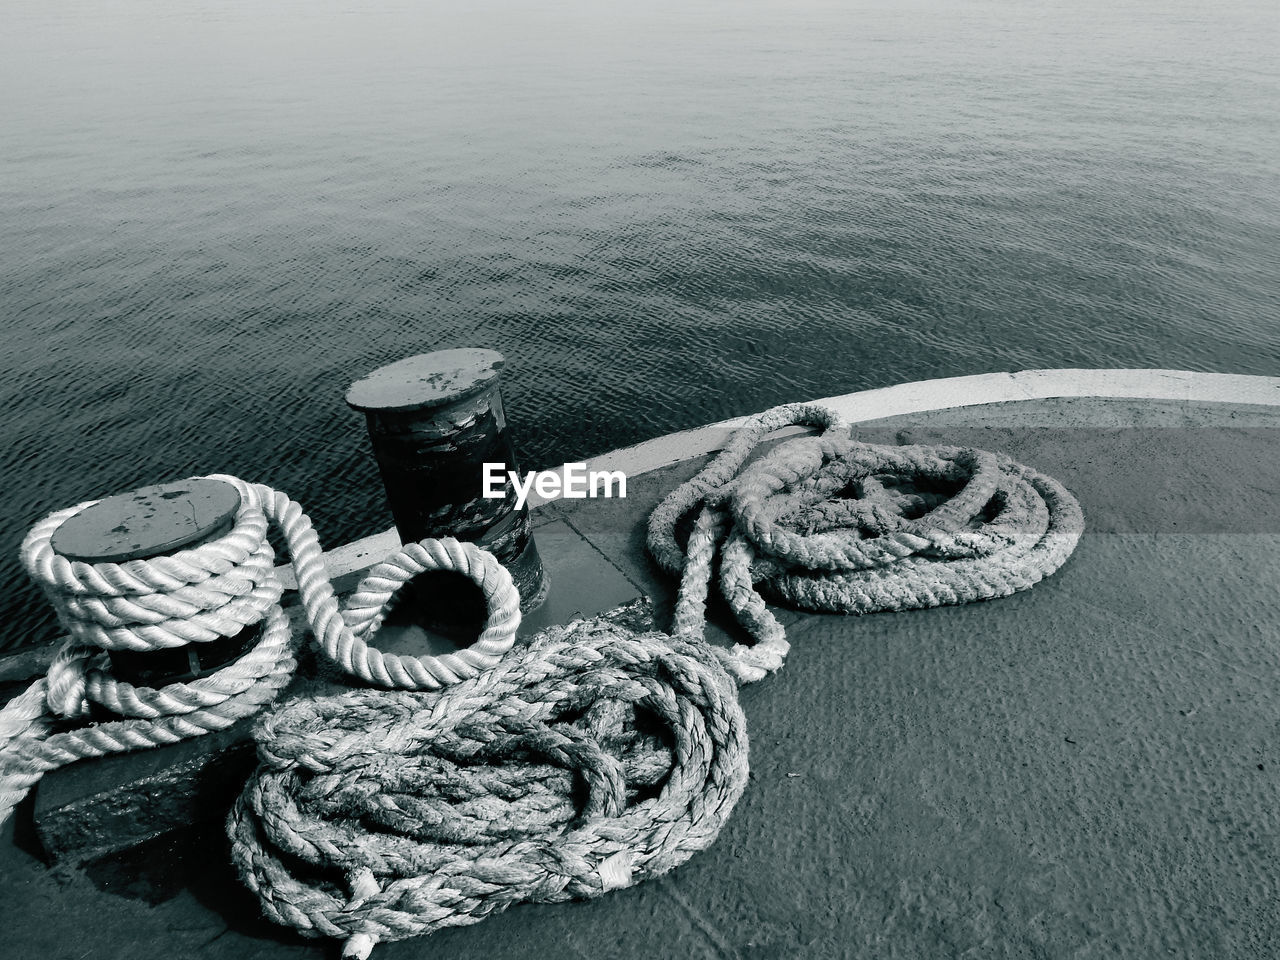 HIGH ANGLE VIEW OF ROPE TIED TO BOLLARD IN HARBOR